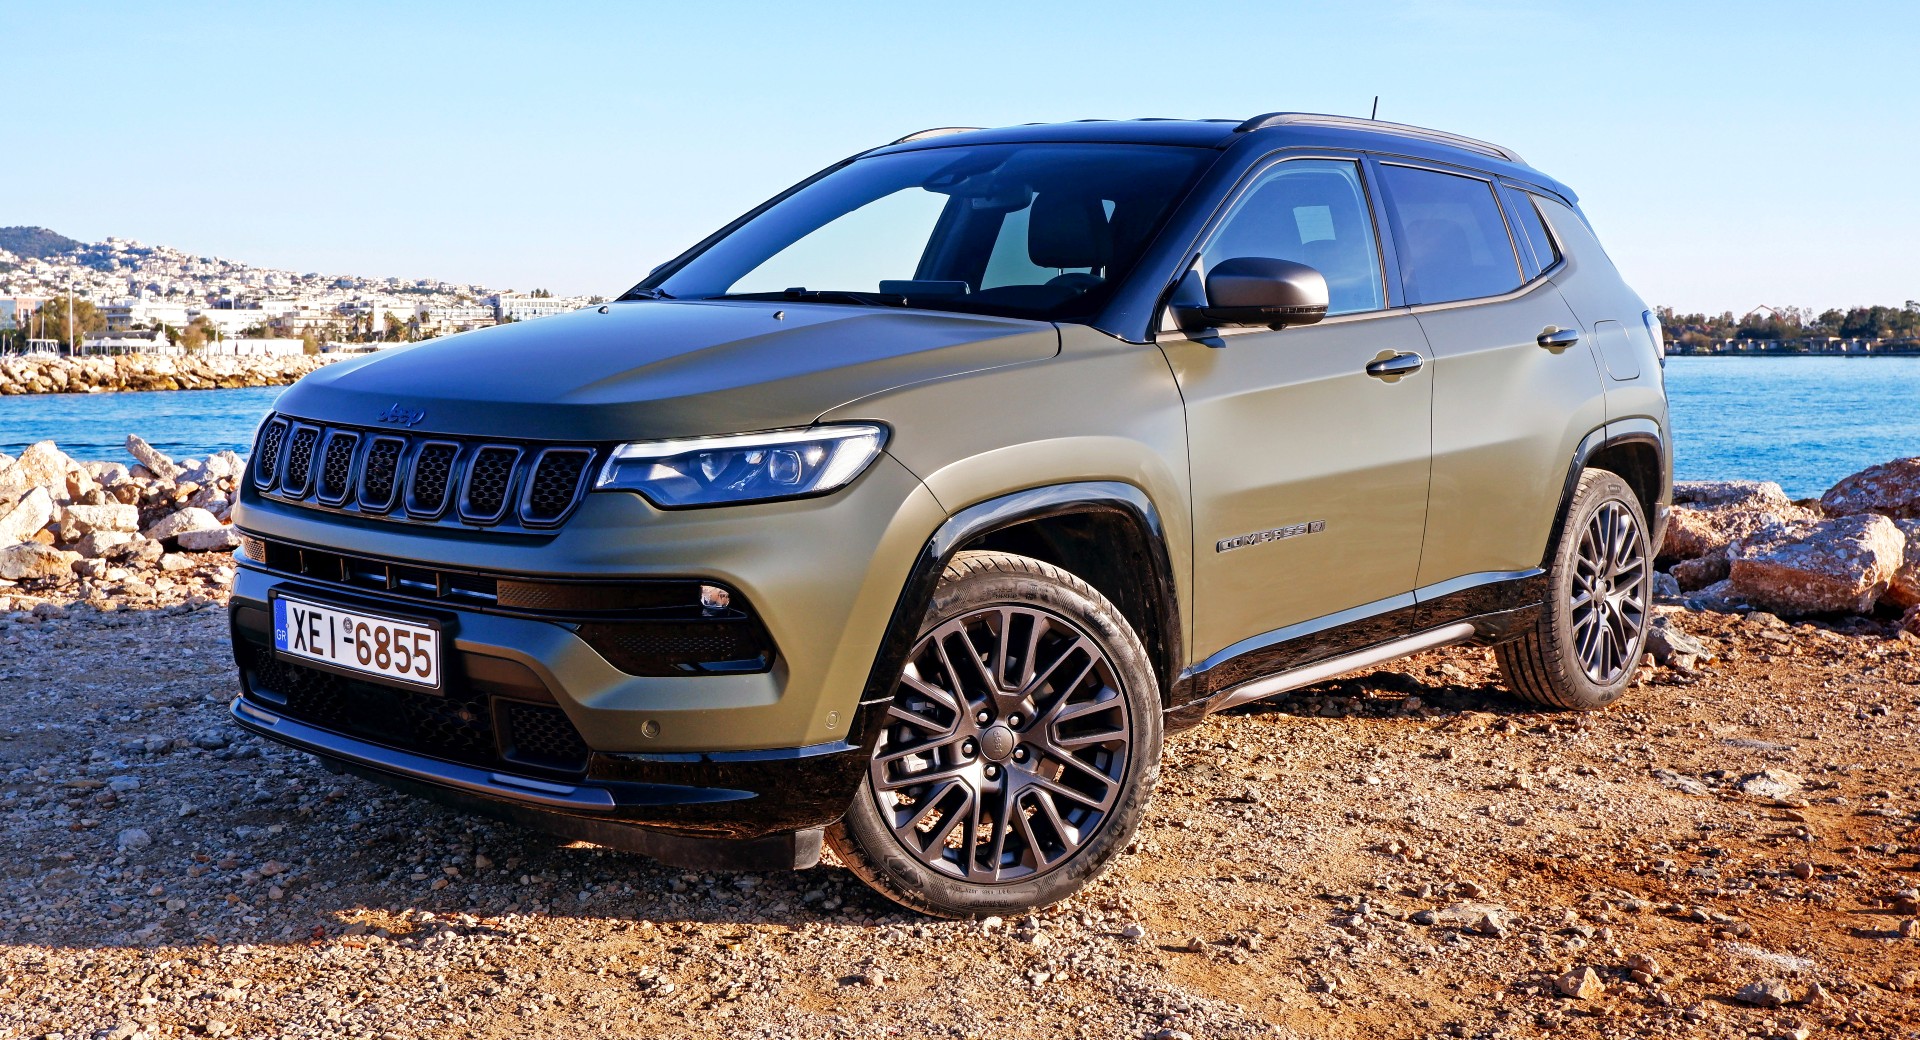 We’re Driving Jeep’s Plugin Hybrid 2022 Compass 4Xe, What Do You Want